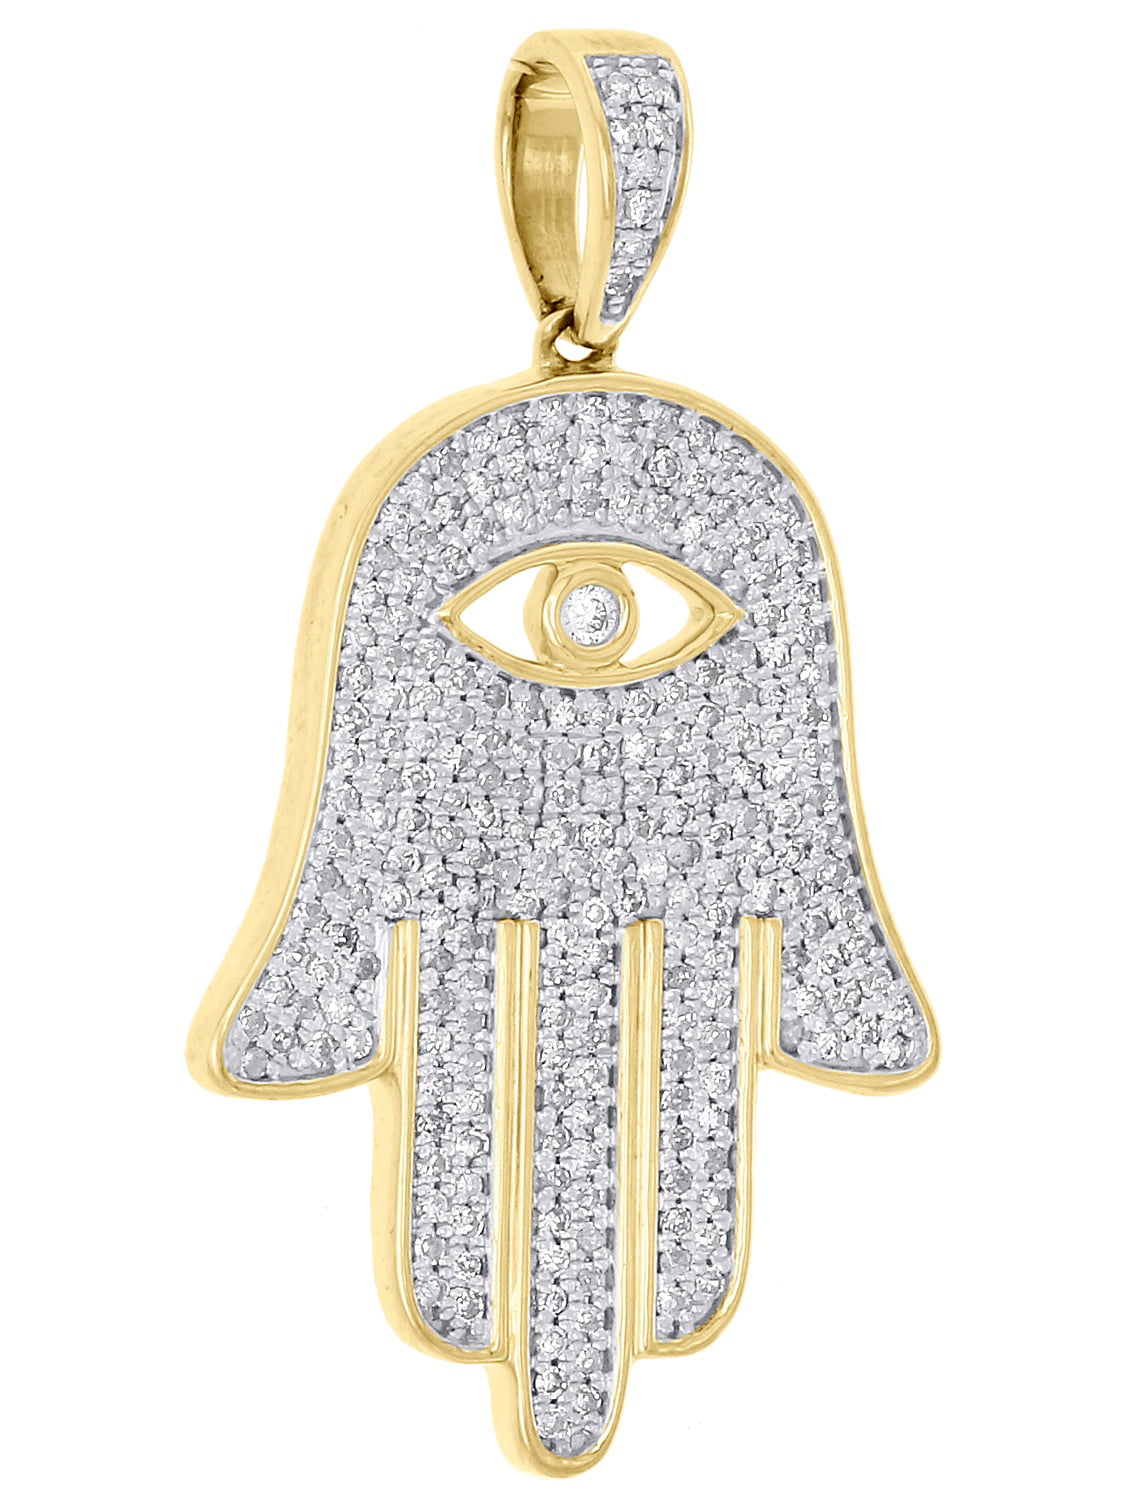 Chain Details about   Real Diamonds Hamsa Hand of Fatima Charm 10K White Gold Finish Pendent